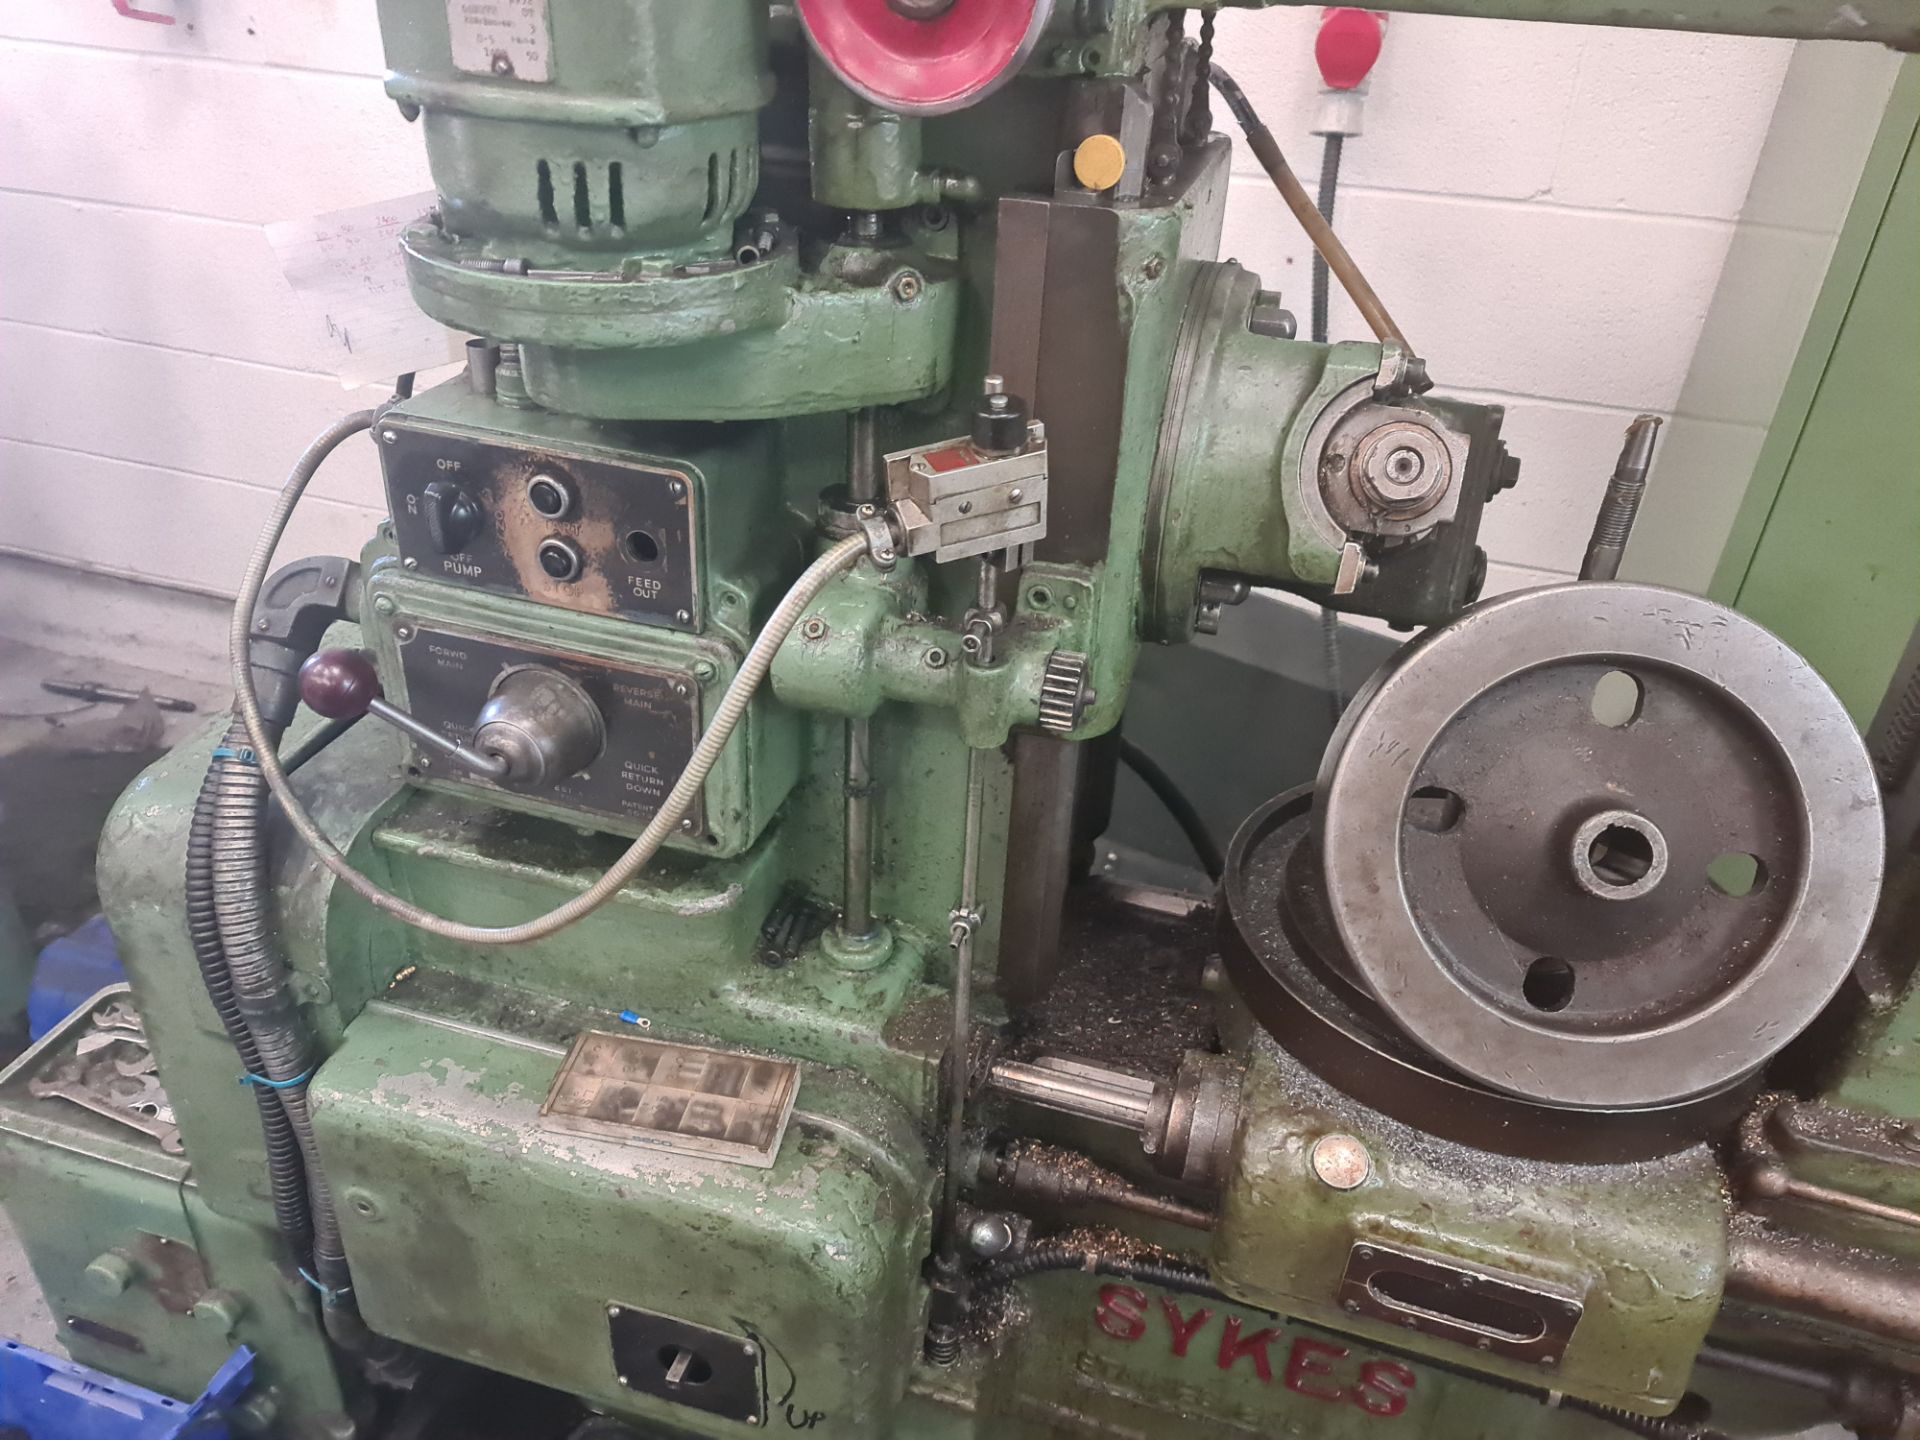 Sykes HV14 gear hobbing machine. This lot includes the crates & contents immediately surrounding th - Image 11 of 23